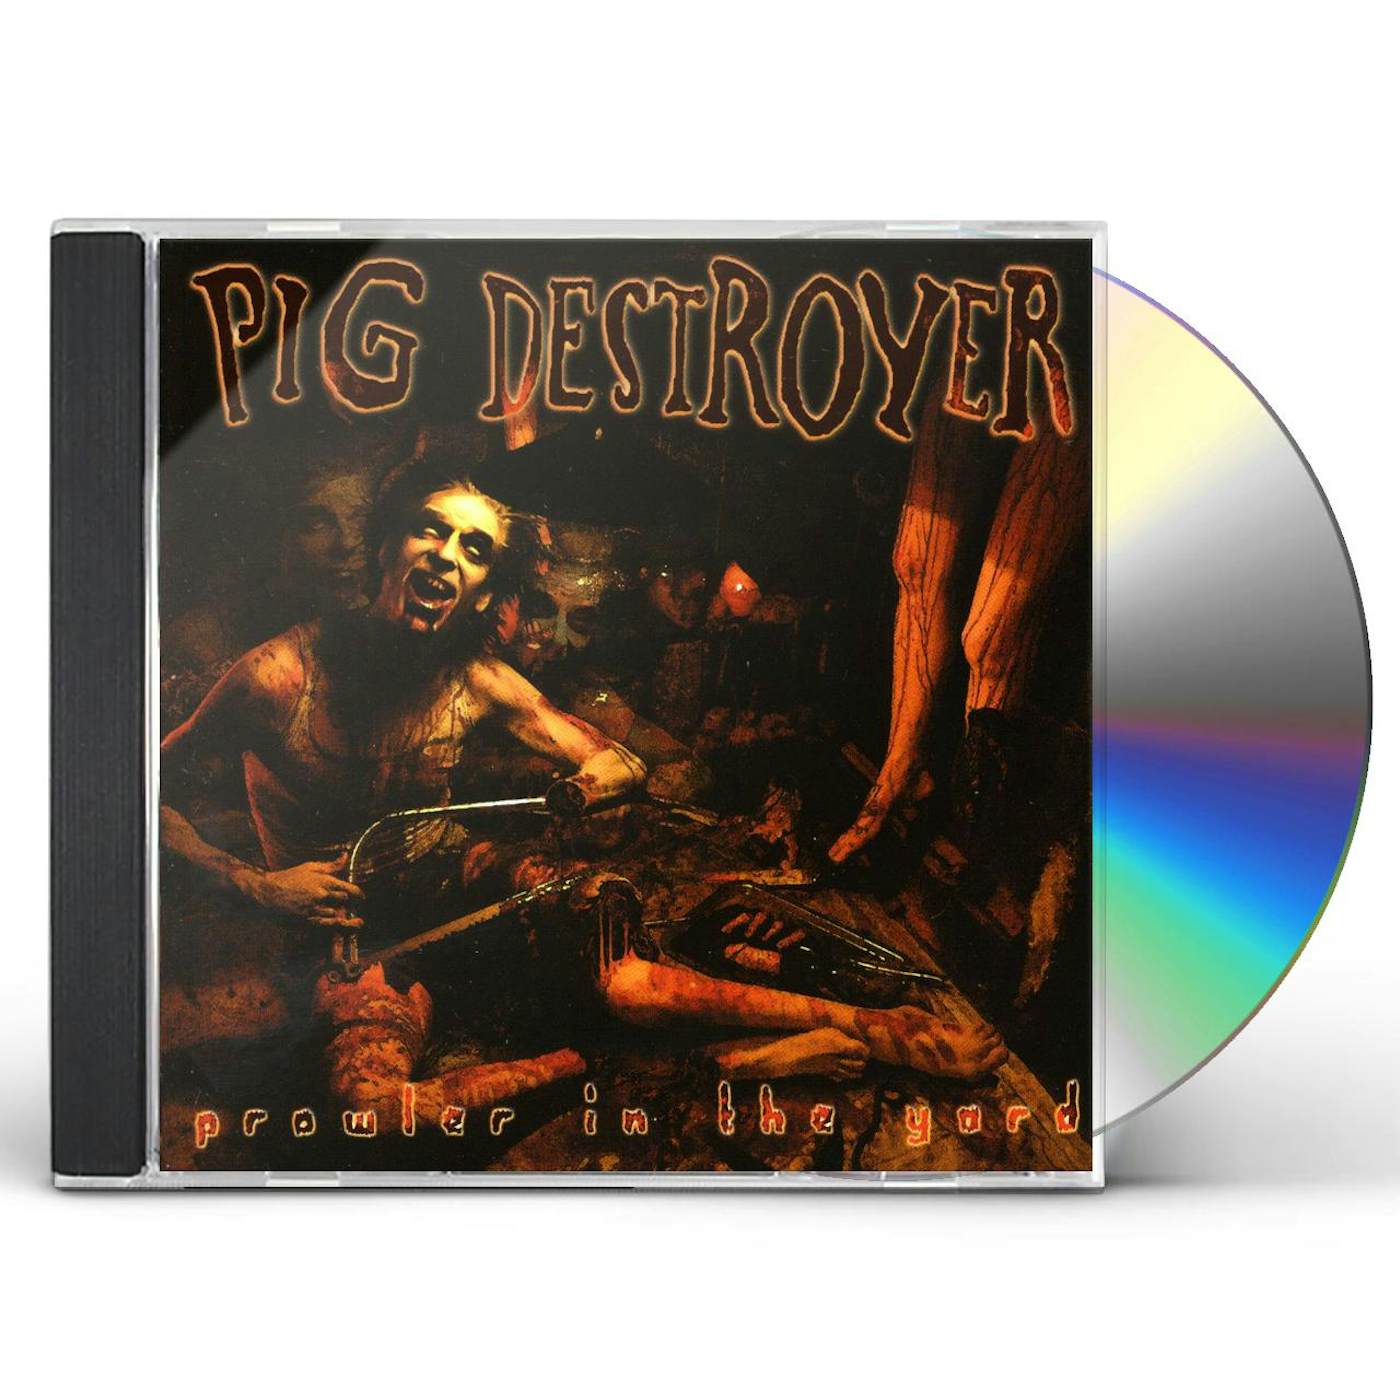 Pig Destroyer PROWLER IN THE YARD CD